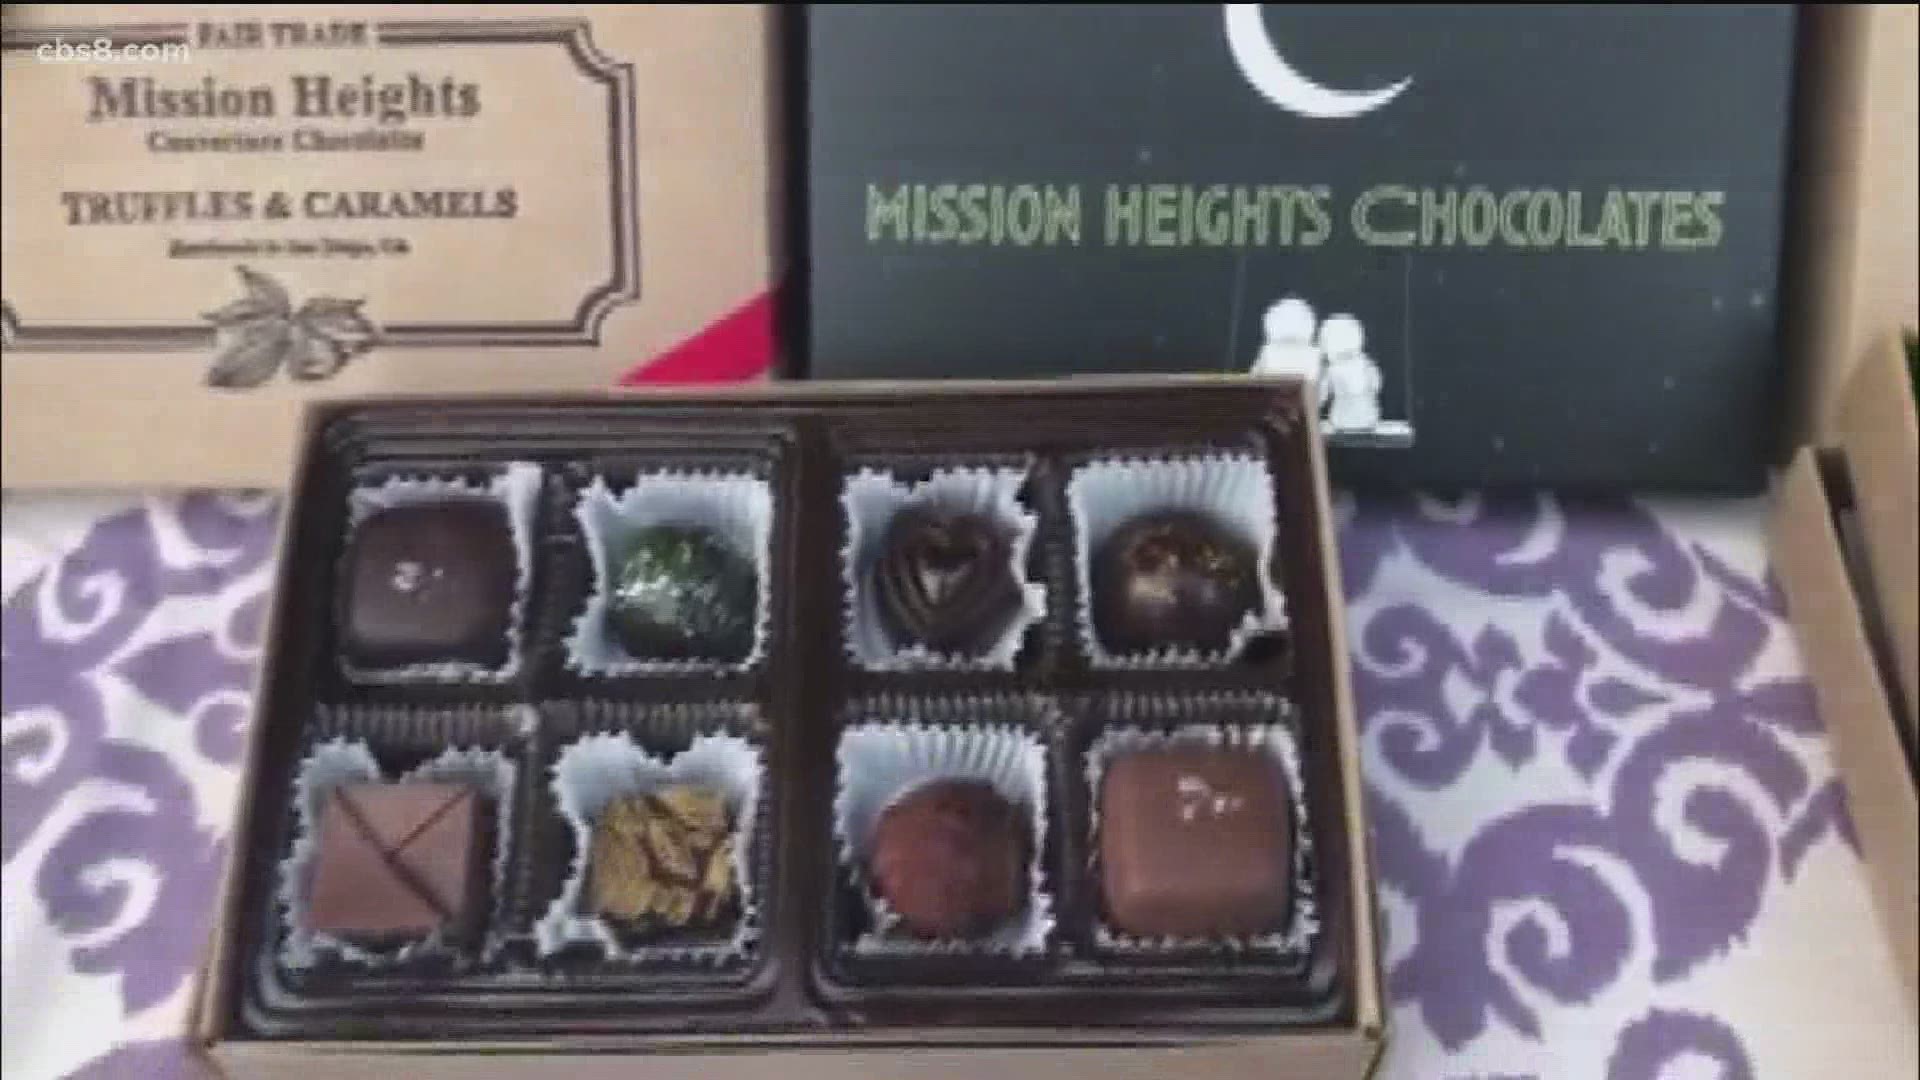 All of their chocolate is Couverture Fair Trade Premium chocolate. Find out where to buy or order online at: missionheightschocolates.com